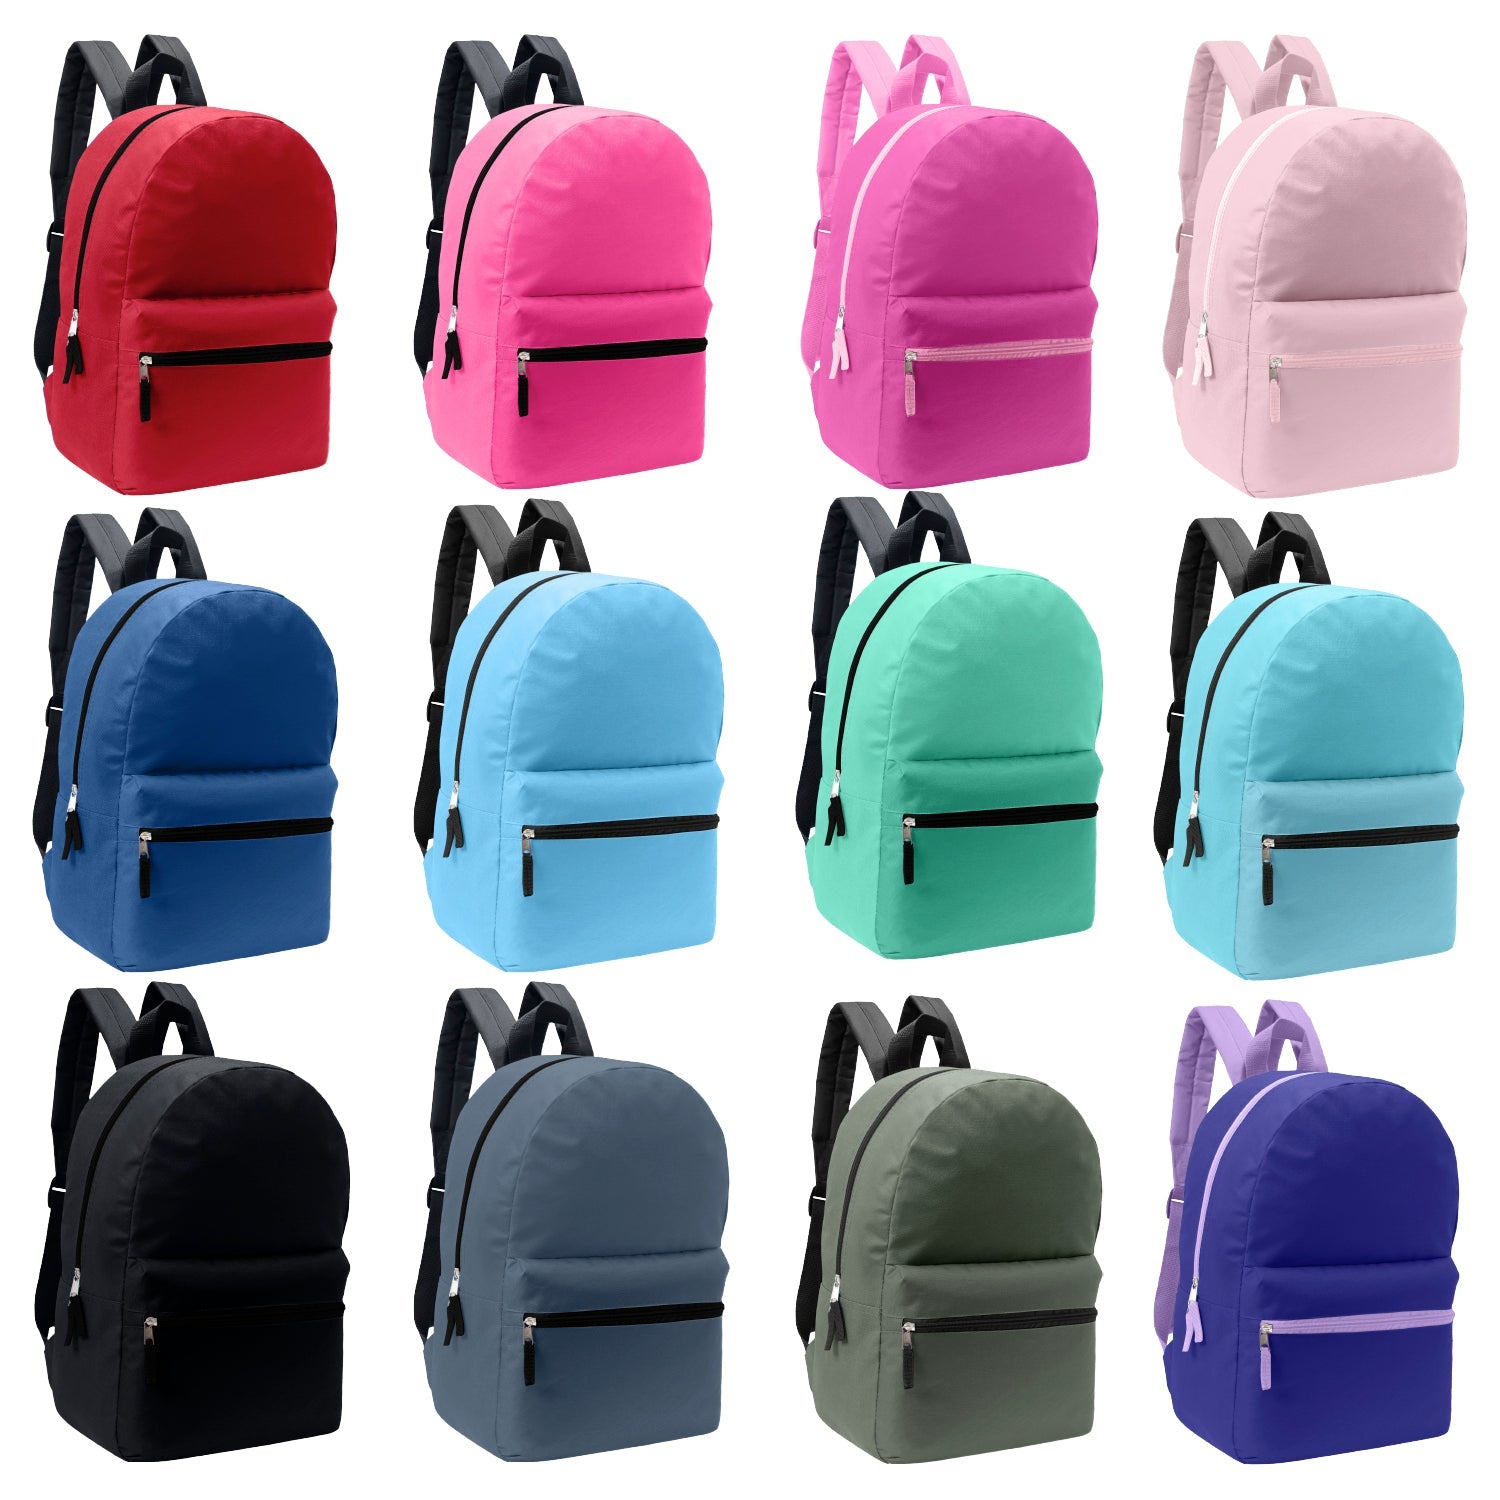 12 Wholesale Blank Student 17" Backpacks in Assorted Colors and 12 Bulk School Supply Kits of Your Choice